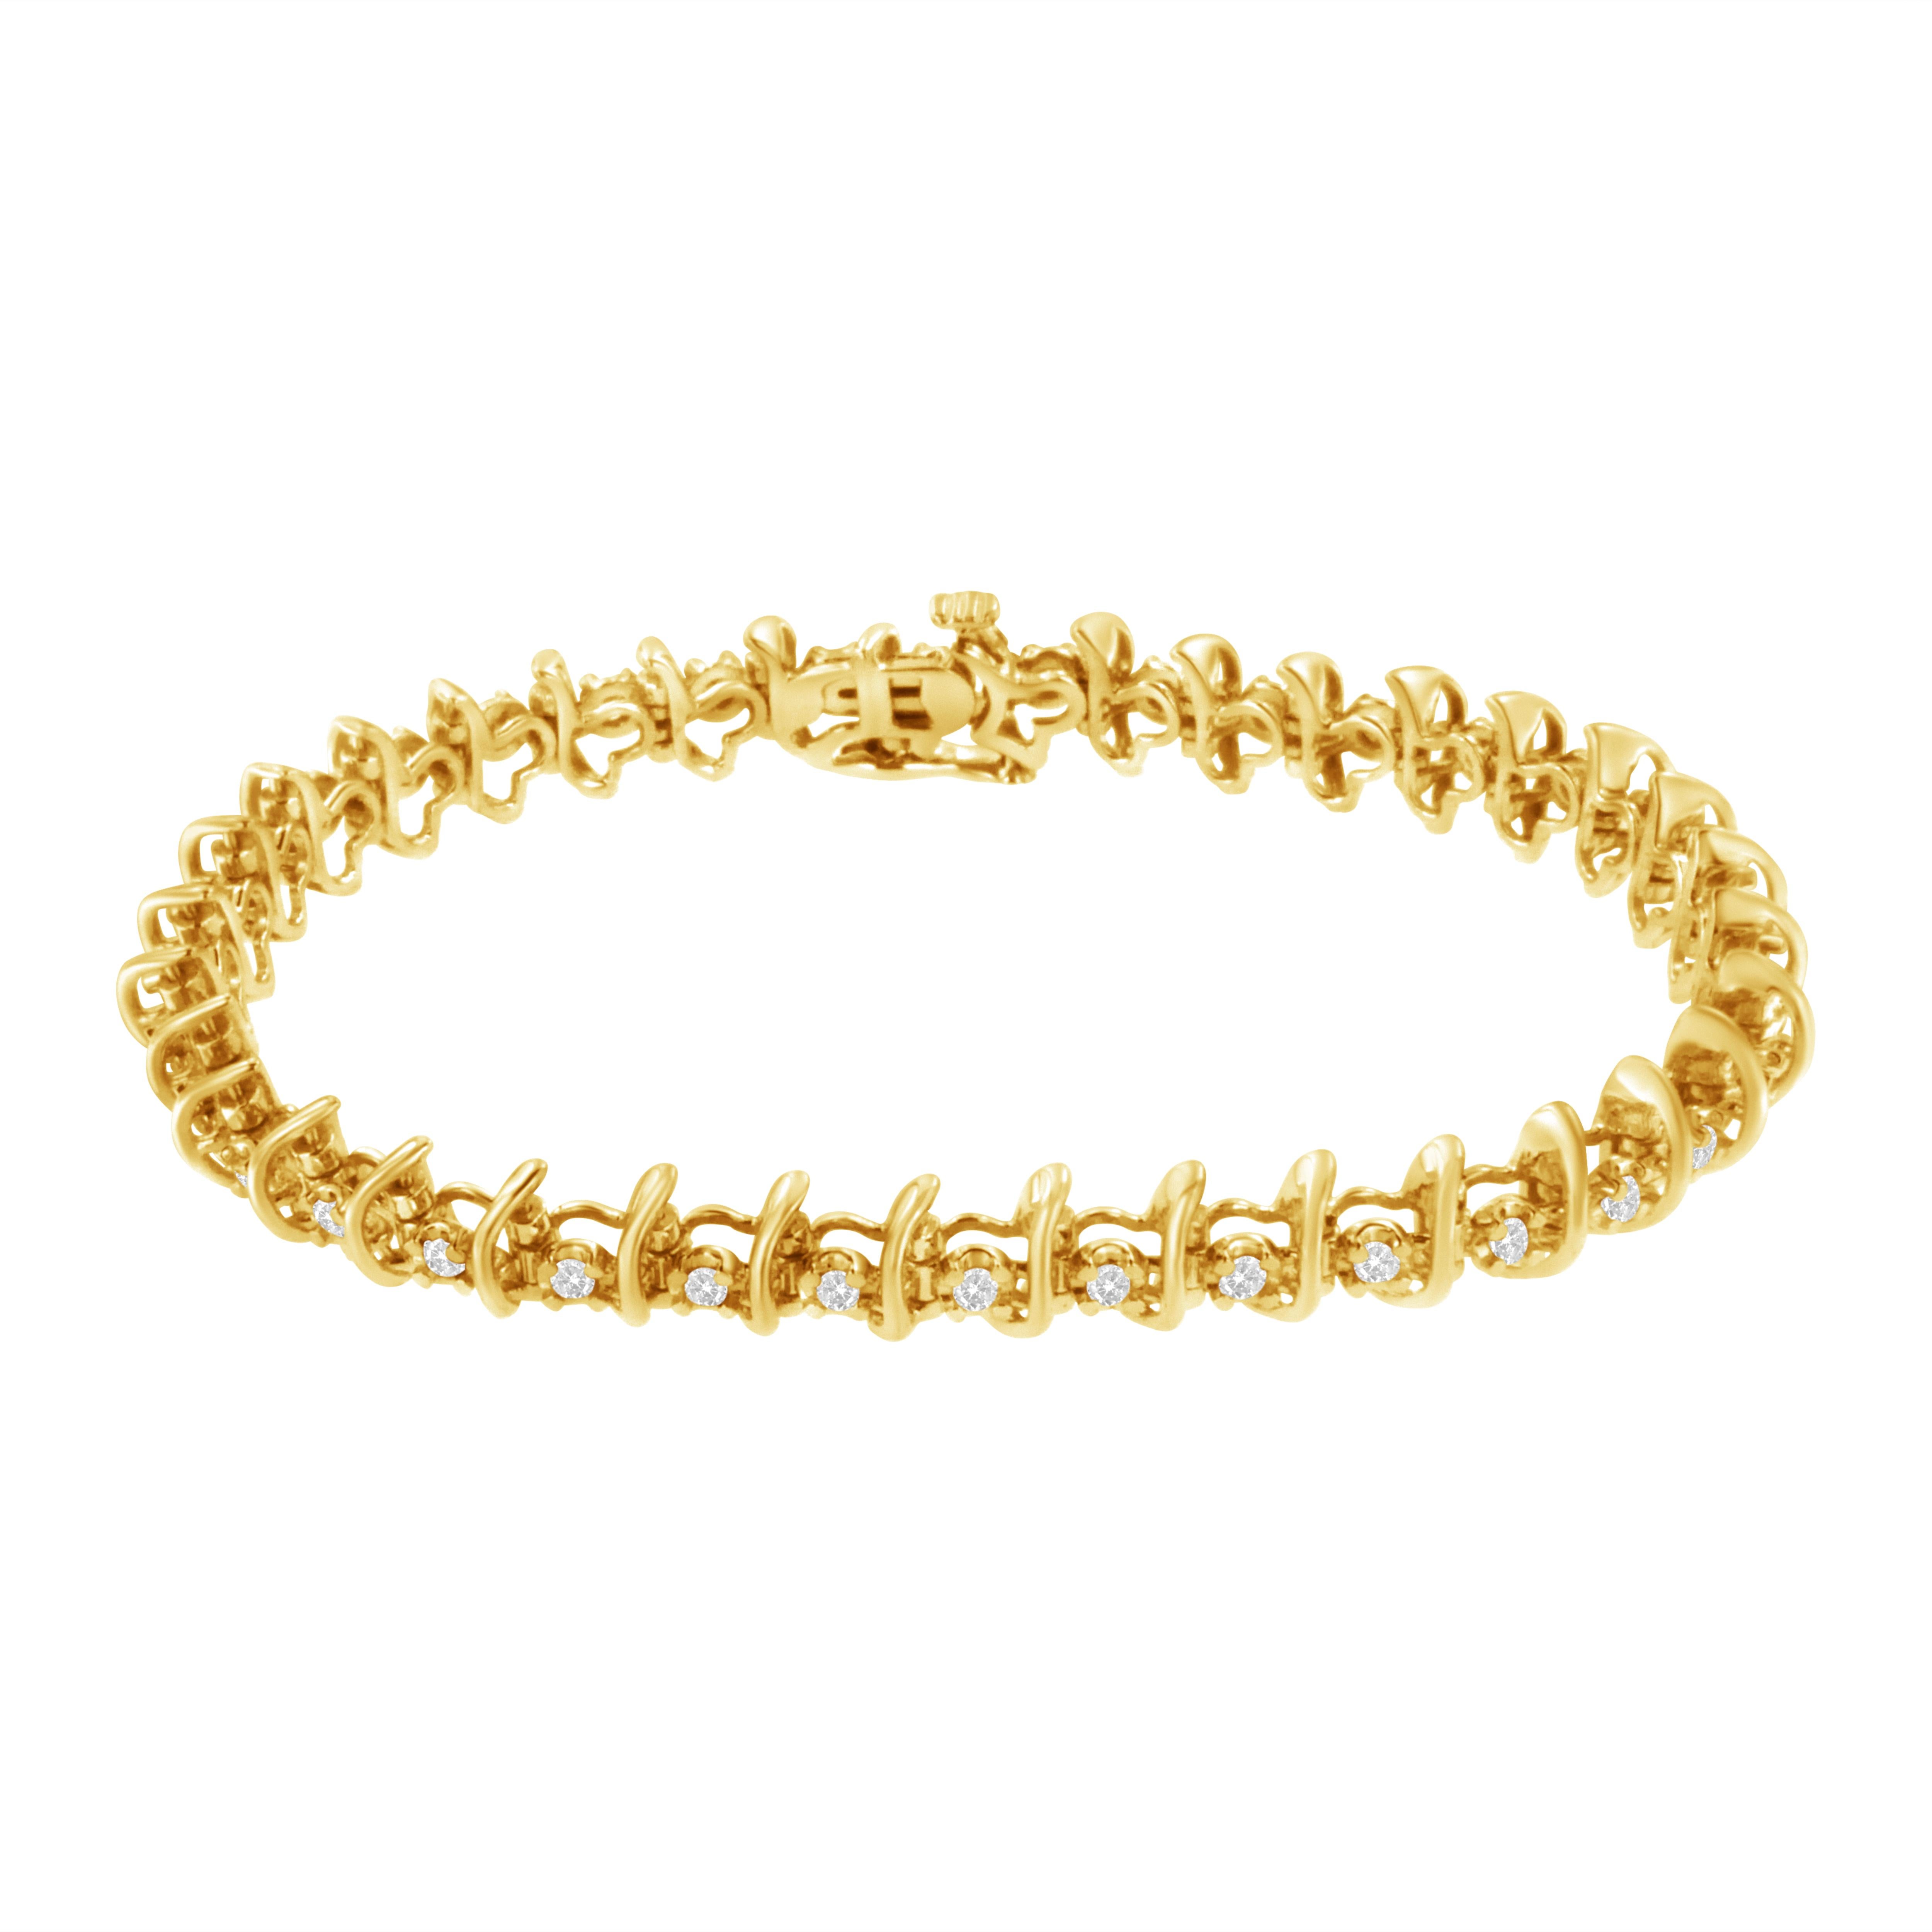 This glamorous 10k yellow gold plated link bracelet showcases 36 round cut diamonds that sparkle along the length of the bracelet. 1 carat TDW of prong set diamonds alternate with soft waving ribbons of warm yellow gold. The bracelet secures with a